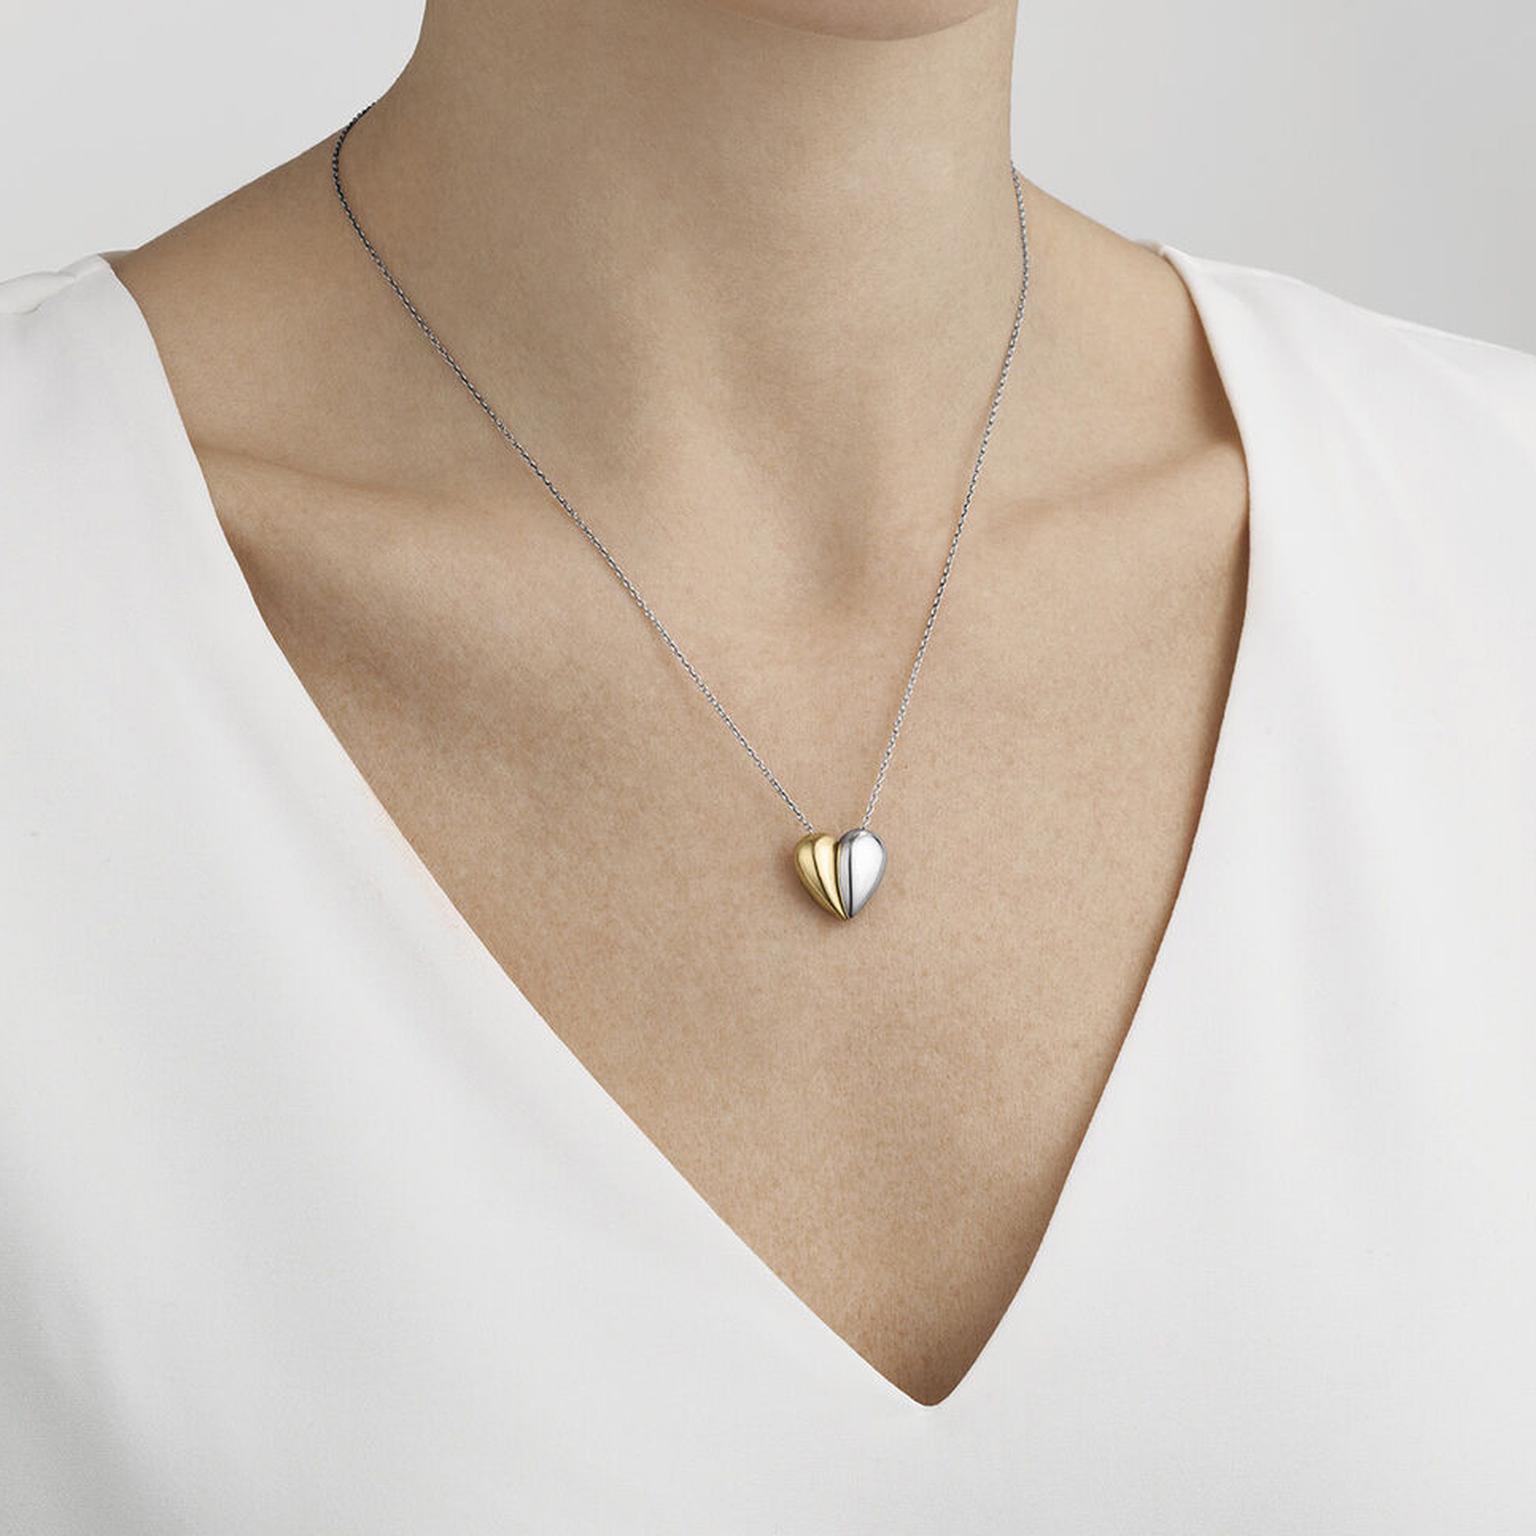 Hearts necklace by Georg Jensen on model